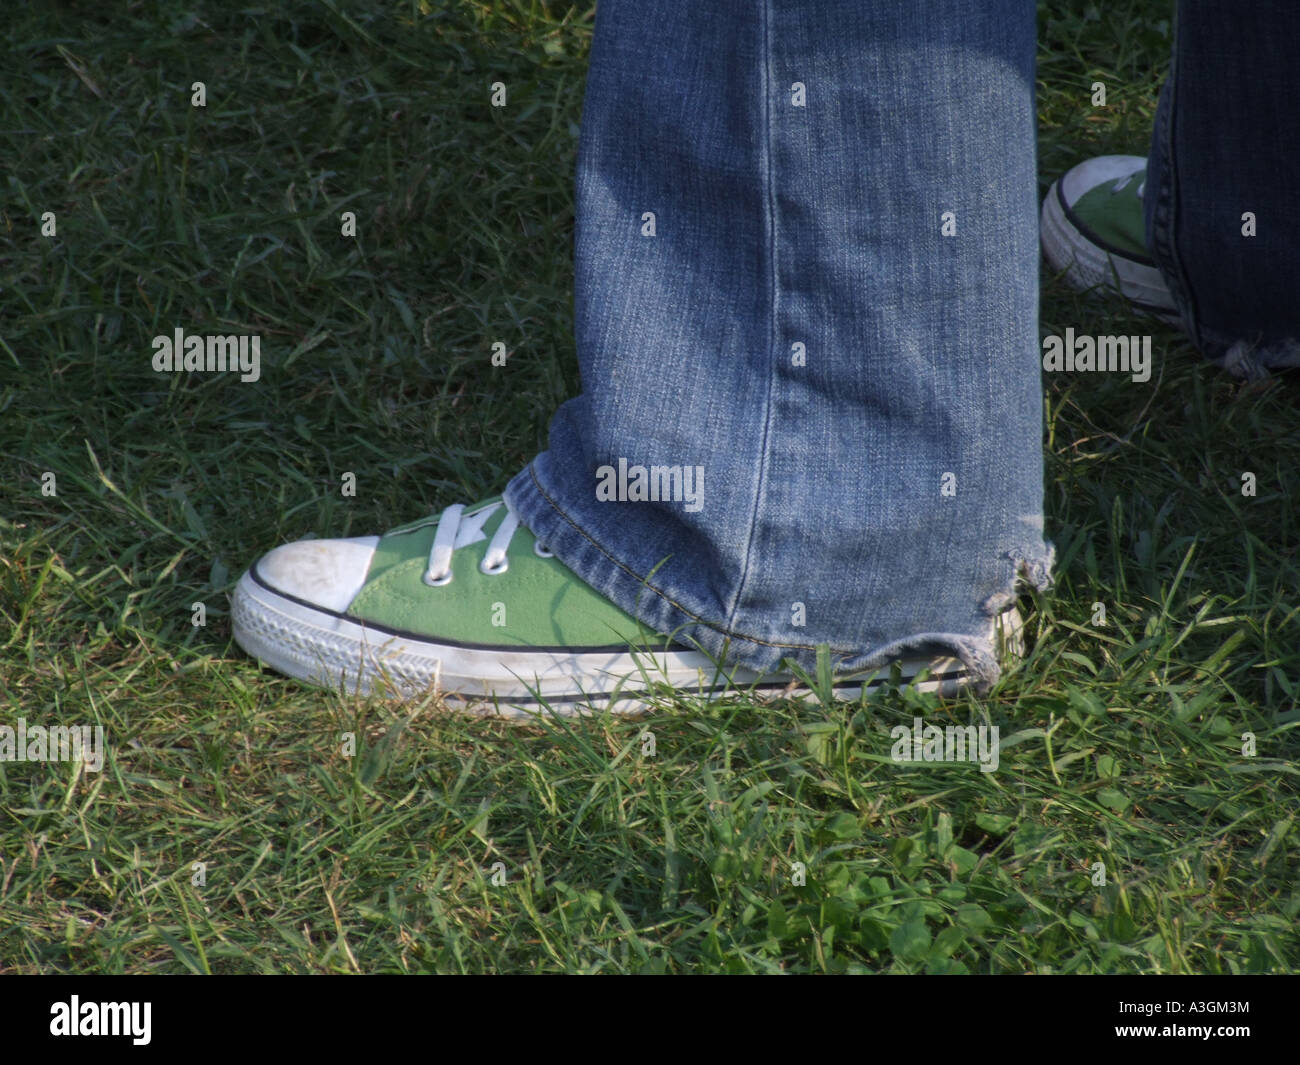 person wearing trainers Stock Photo - Alamy